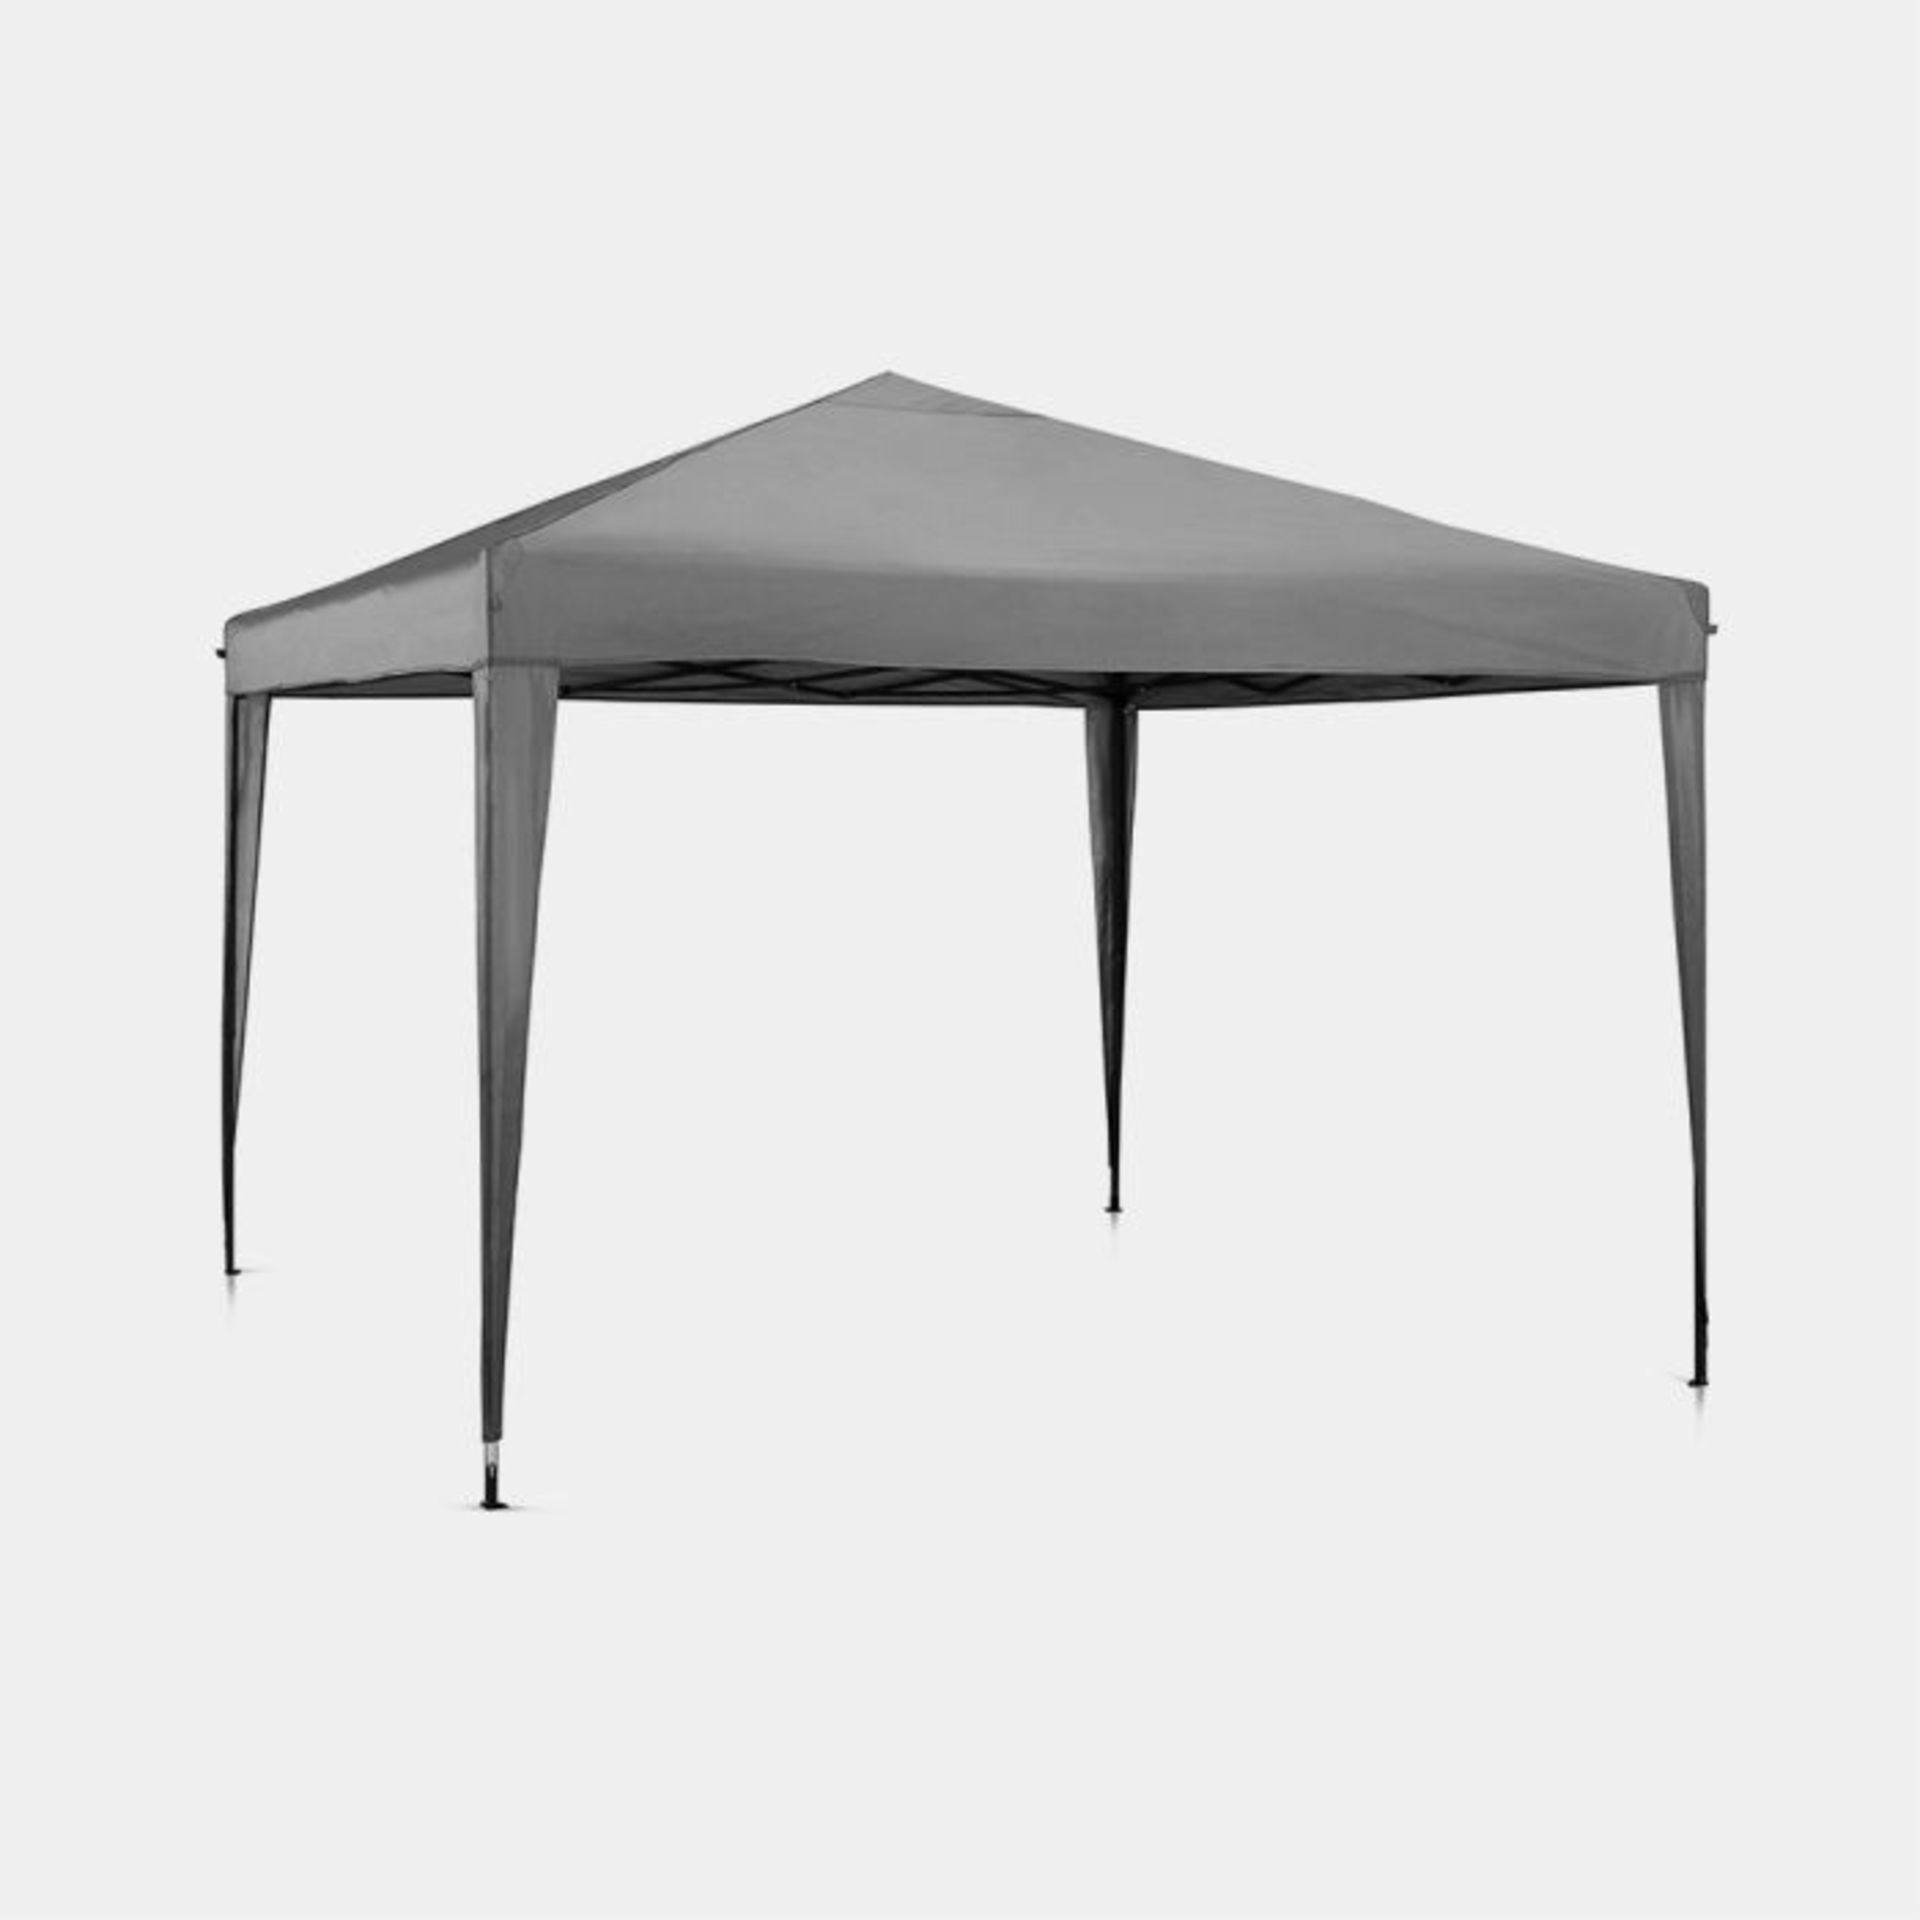 Grey 3x3m Pop-Up Gazebo. - ER33. Elevate your outdoor soirées with this sleek and stylish pop-up